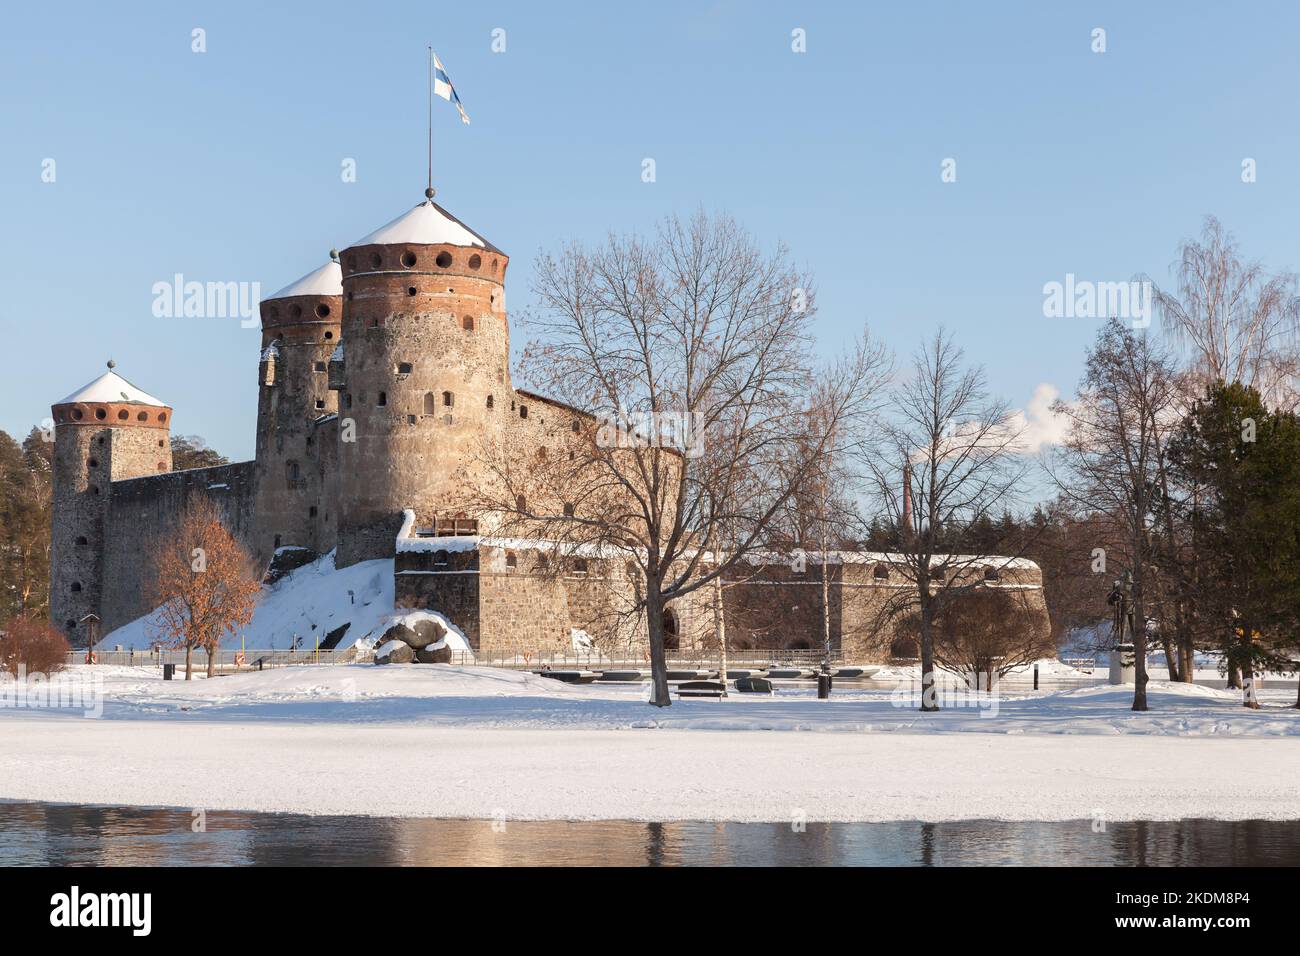 Winter landscape with Olavinlinna, this is a 15th-century three-tower castle located in Savonlinna, Finland Stock Photo